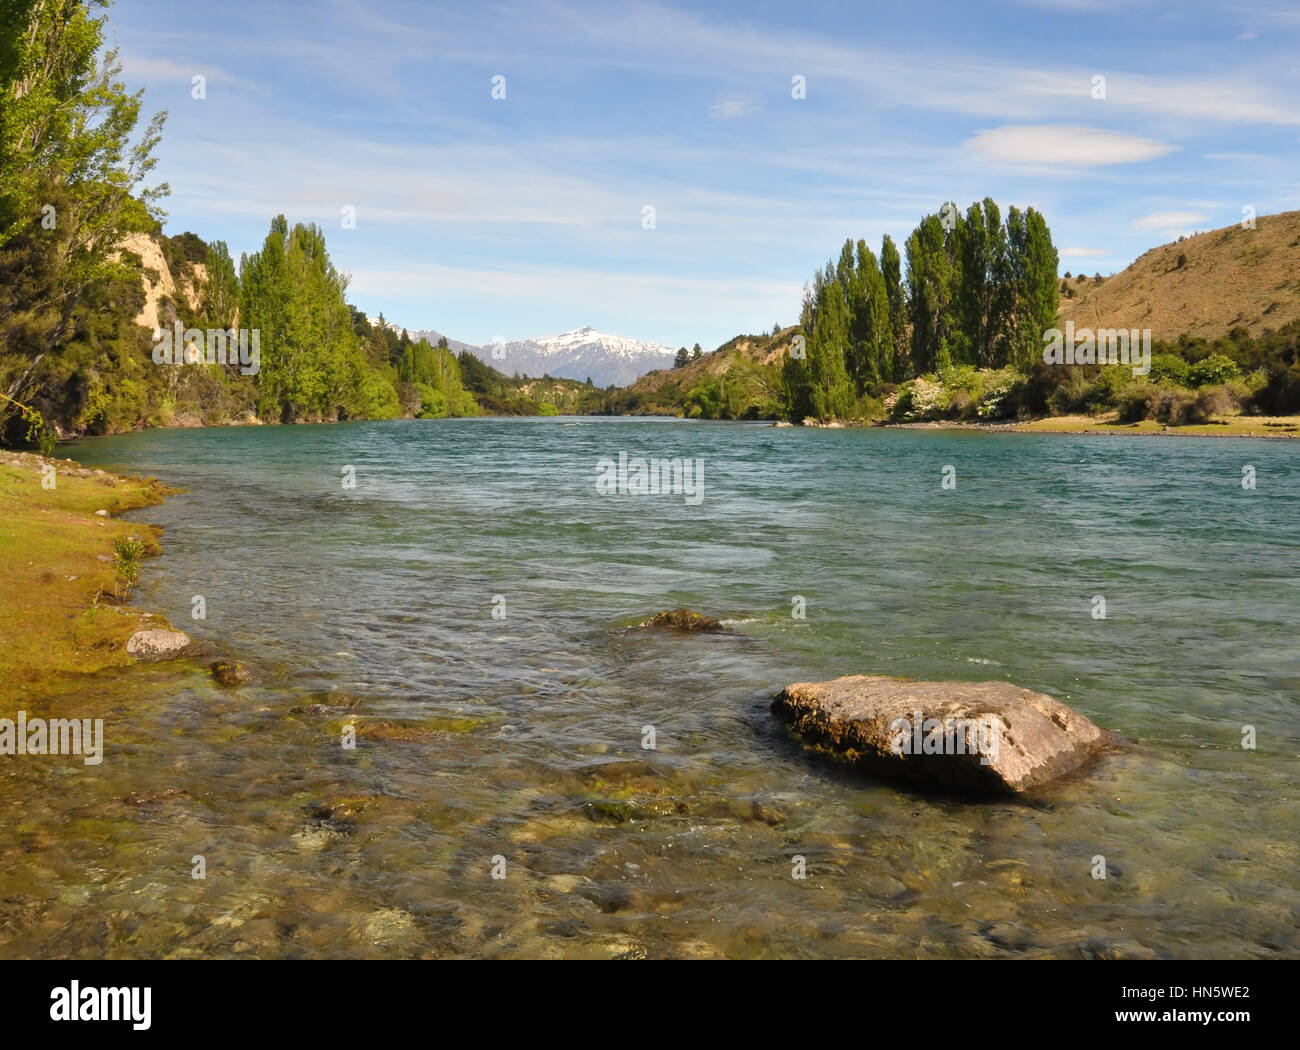 The crystal clear waters of the Clutha river in Otago, New Zealand, One of New Zealand's longest and most beautiful rivers and popular for trout fishi Stock Photo